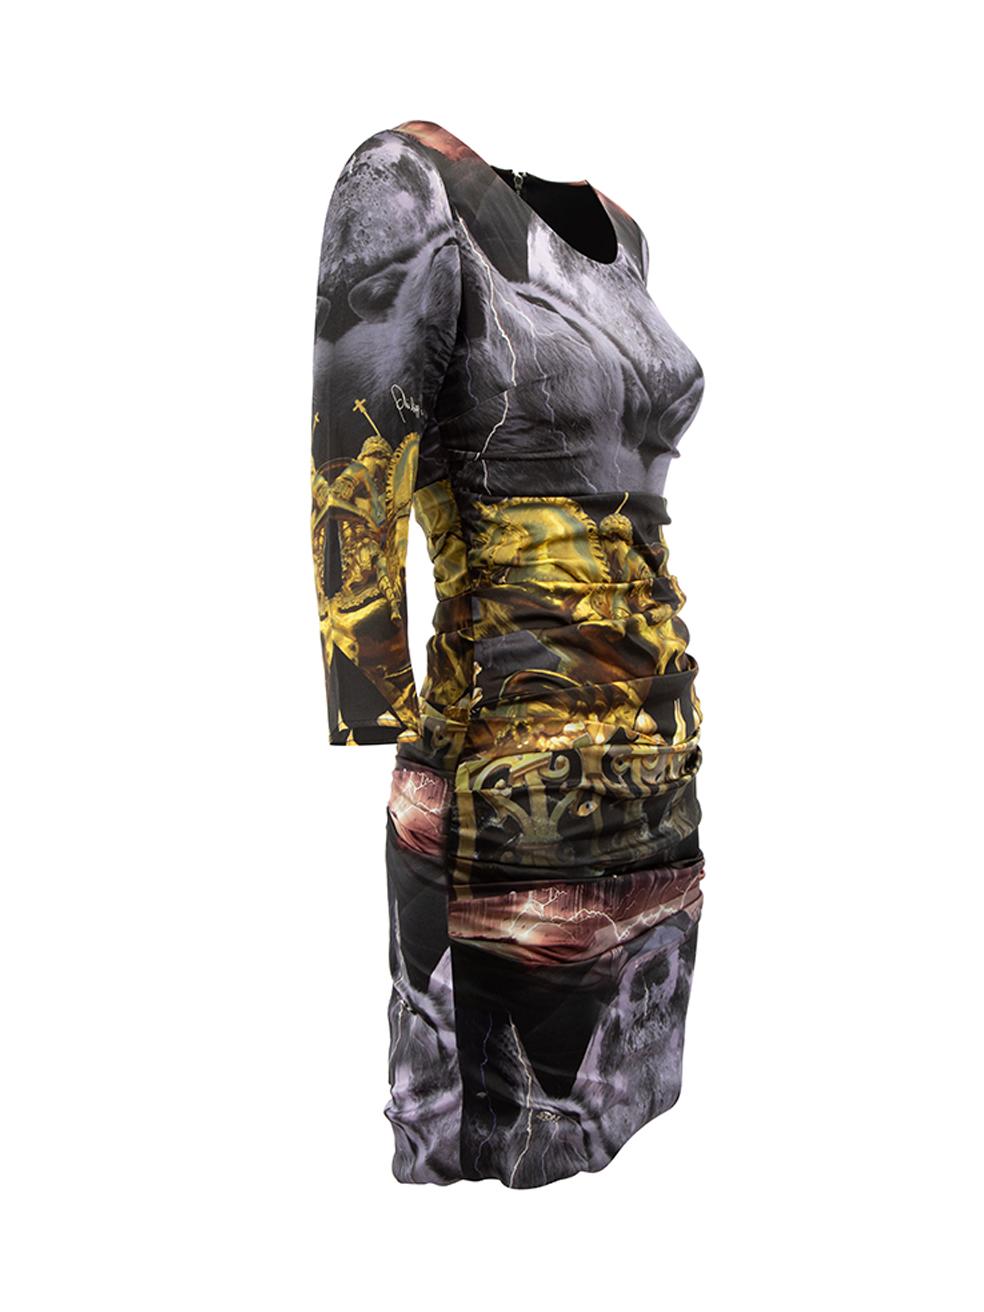 CONDITION is Very good. Minimal wear to dress is evident. Minimal wear to the outer fabric where lines to thread can be seen on this used Philipp Plein designer resale item. 

Details
Multicolour
Silk
Mini dress
Graphic print pattern
Round